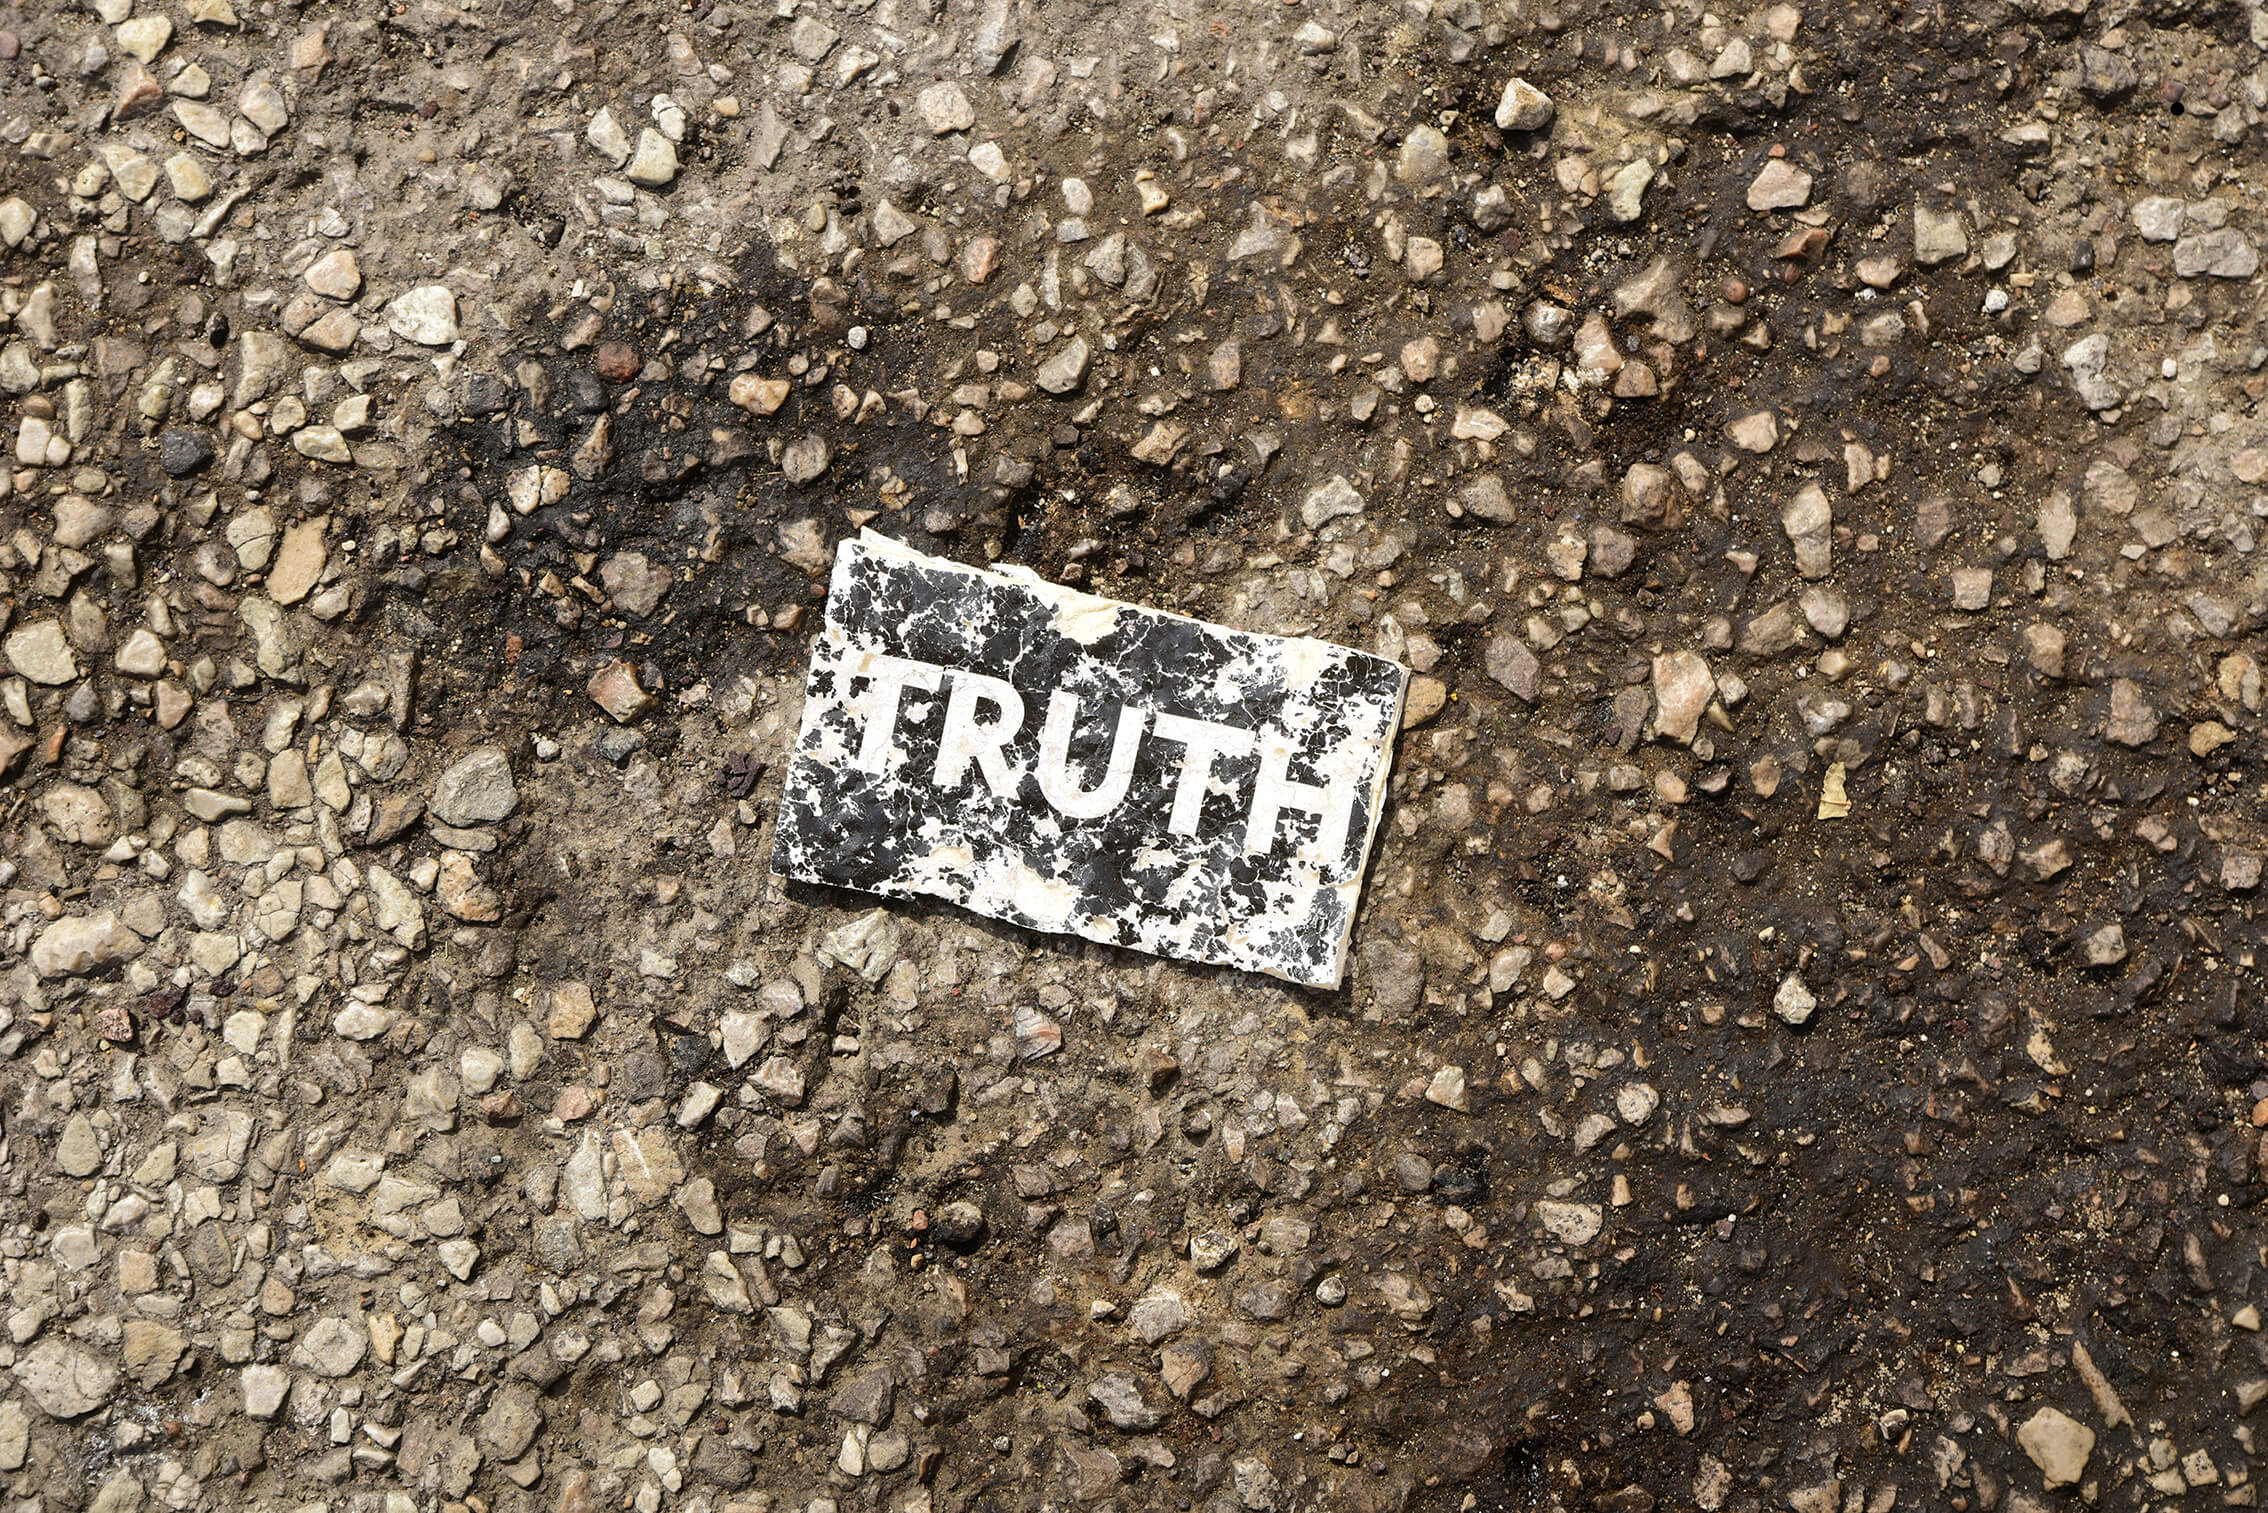 Distressed "TRUTH" sign on a gritty tar surface. 